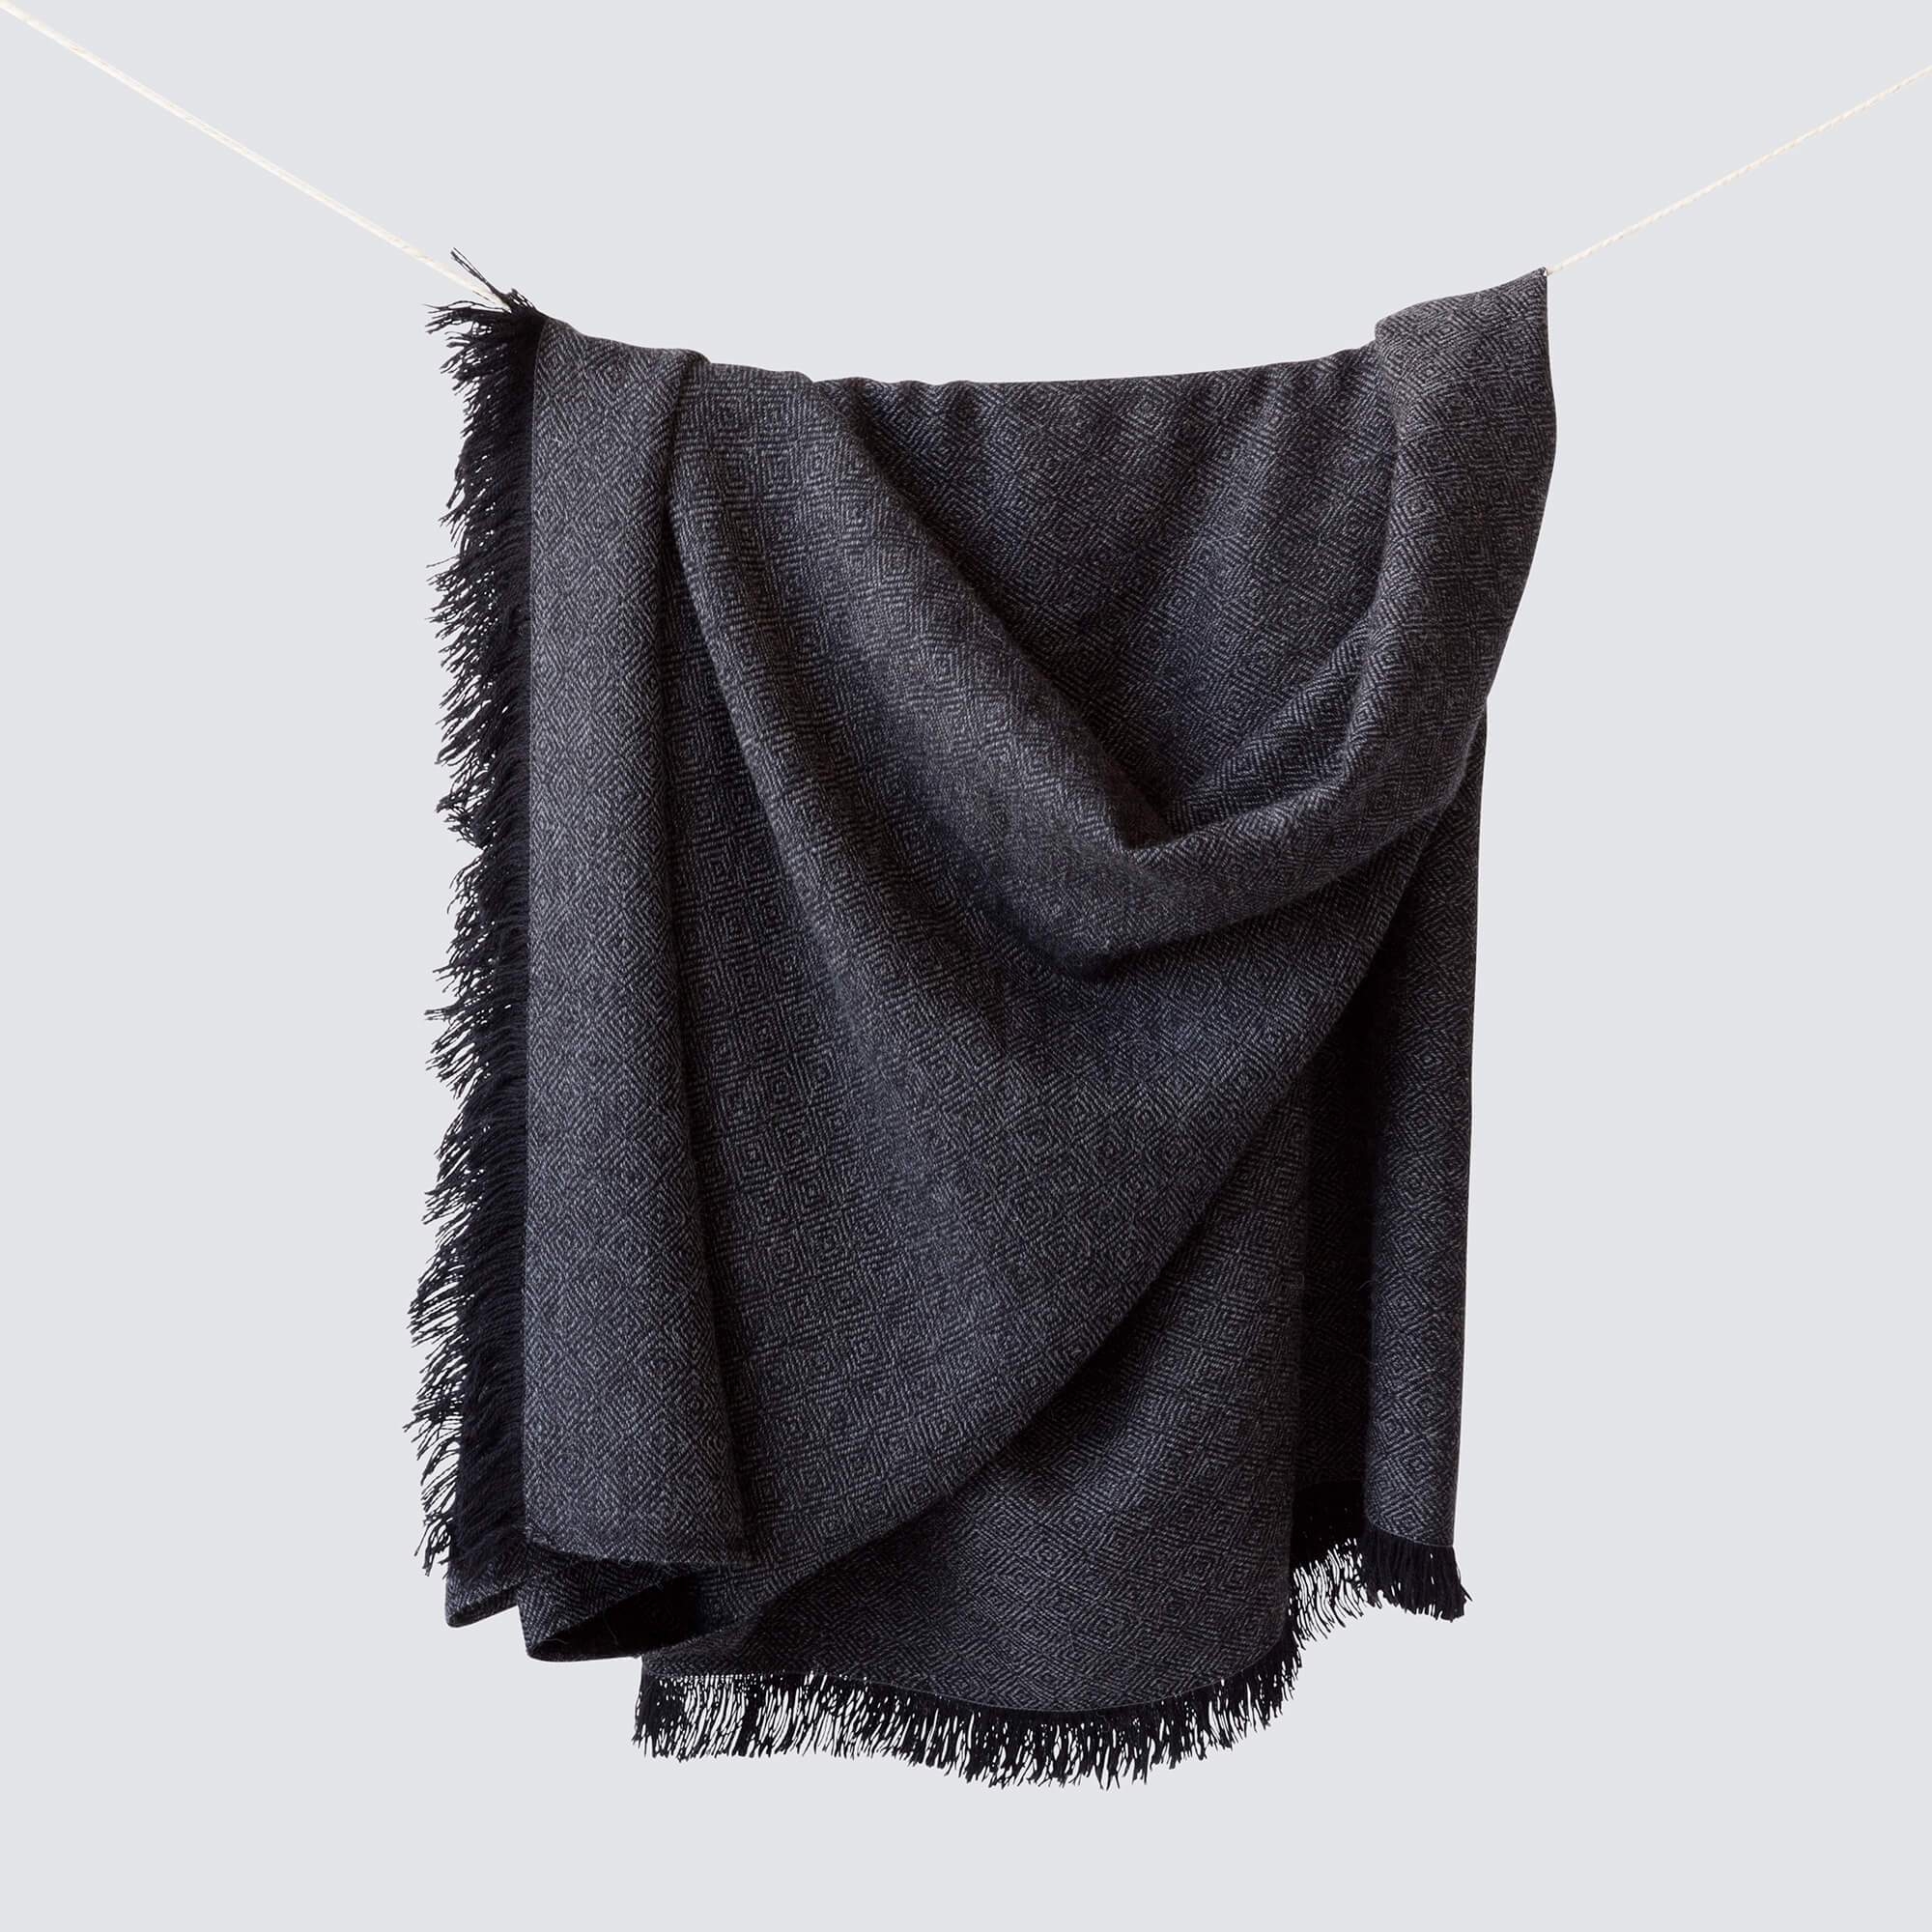 La Calle Alpaca Throw By The Citizenry - Image 0